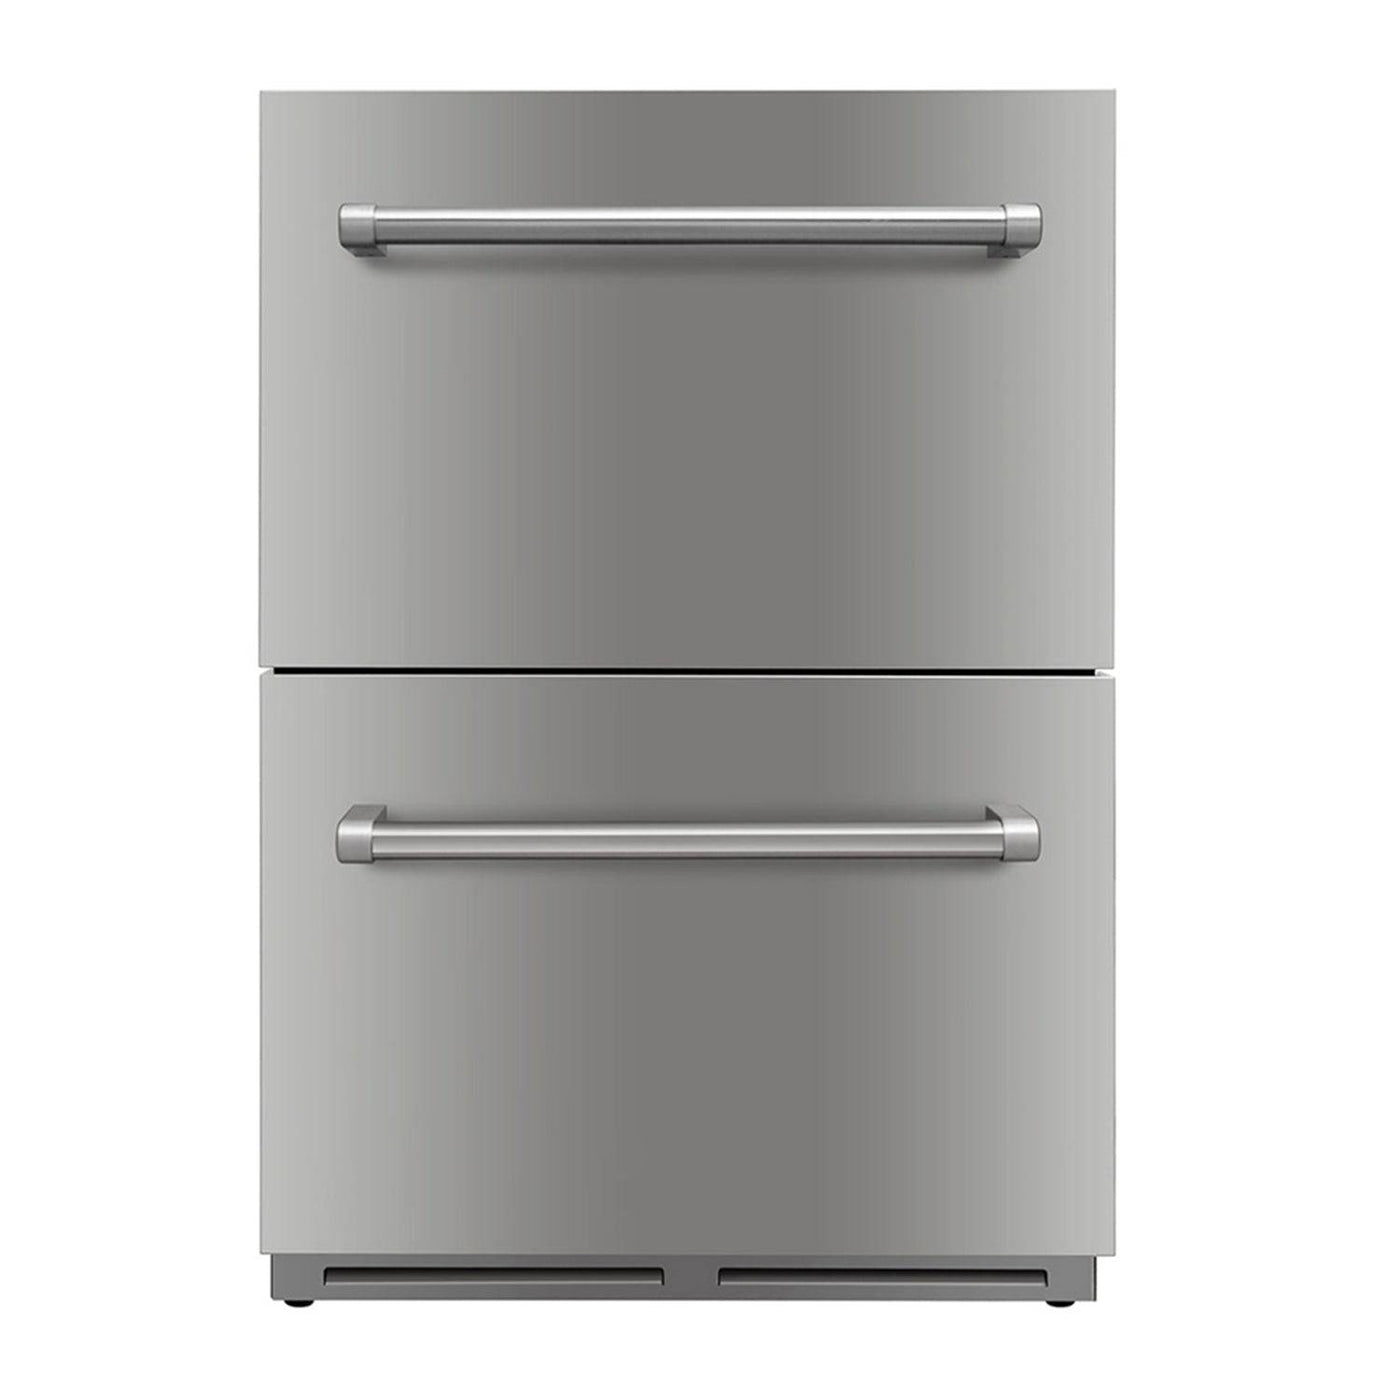 Fobest 24 Inch Stainless Steel Under Counter Refrigerator with 2 Drawers - Refrigerators-Fobest Appliance